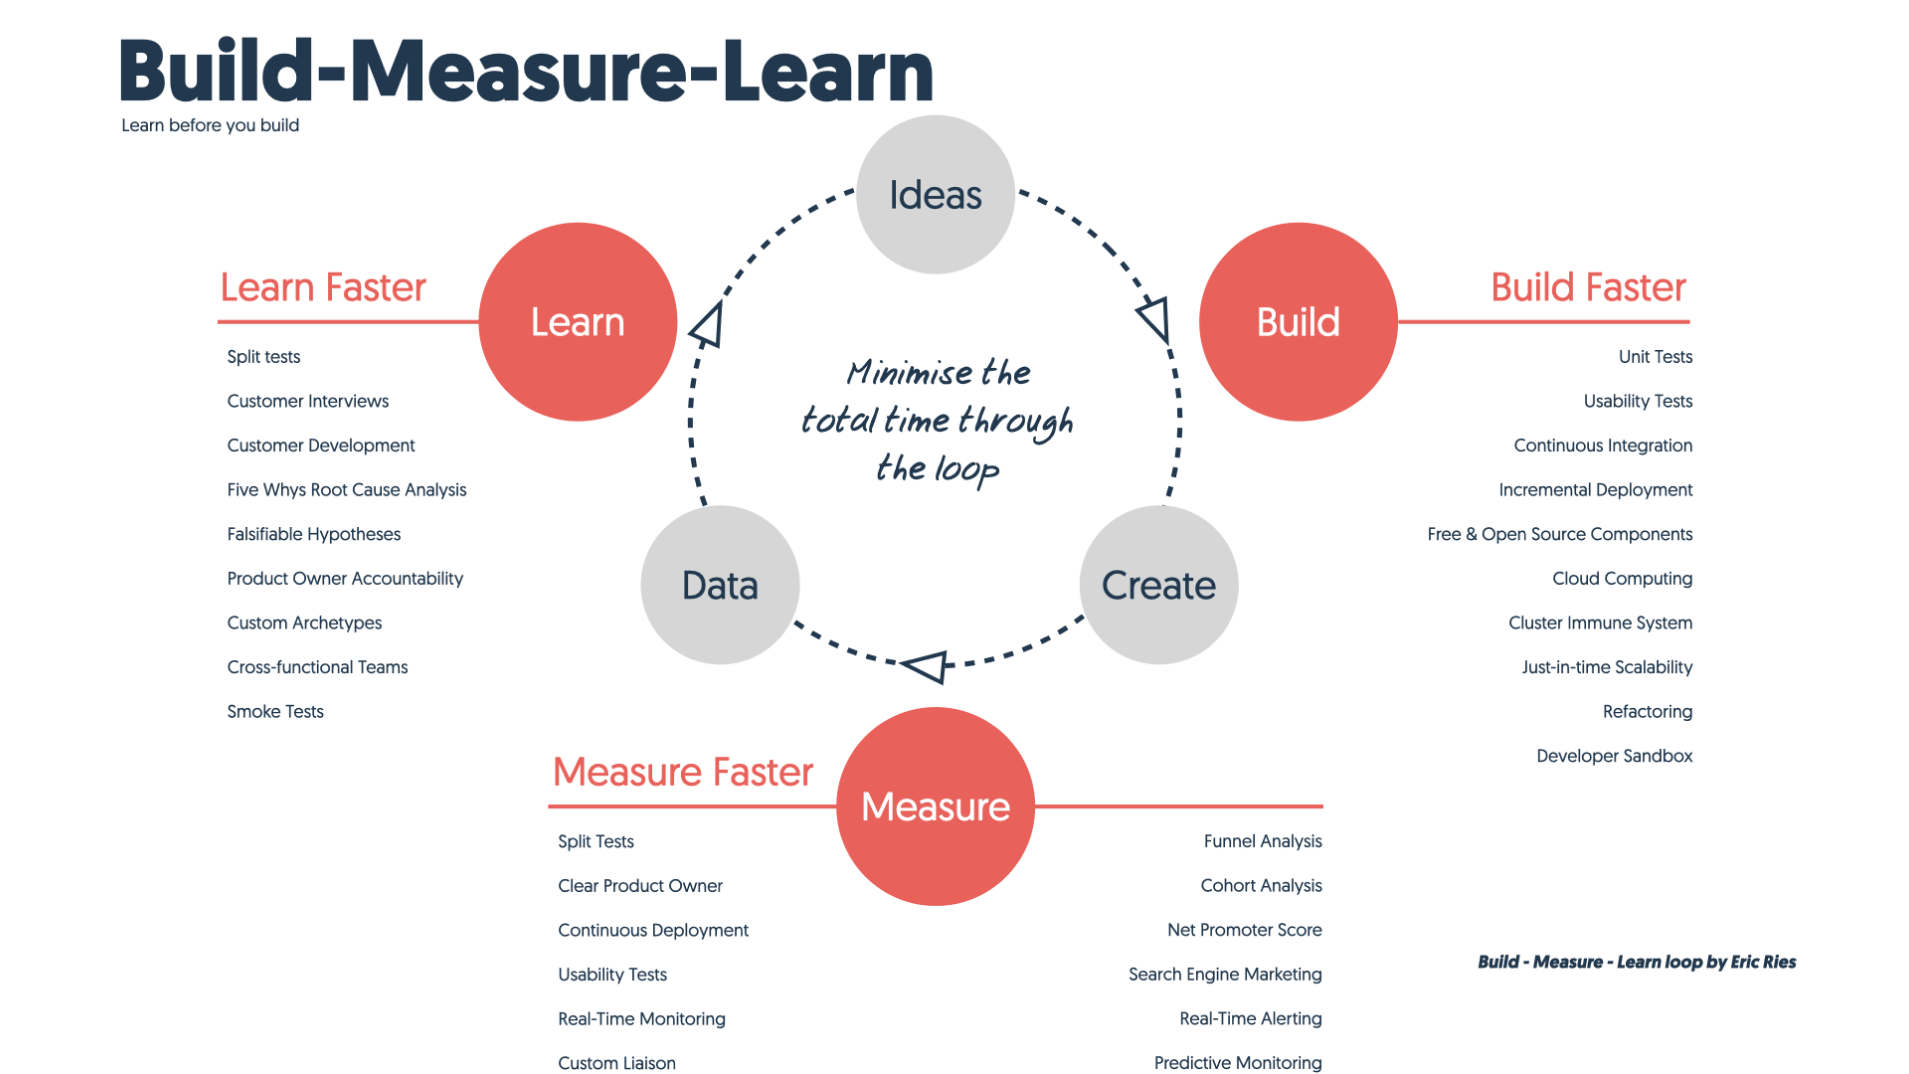 The Build - Measure - Learn loop as thought of by Eric Ries